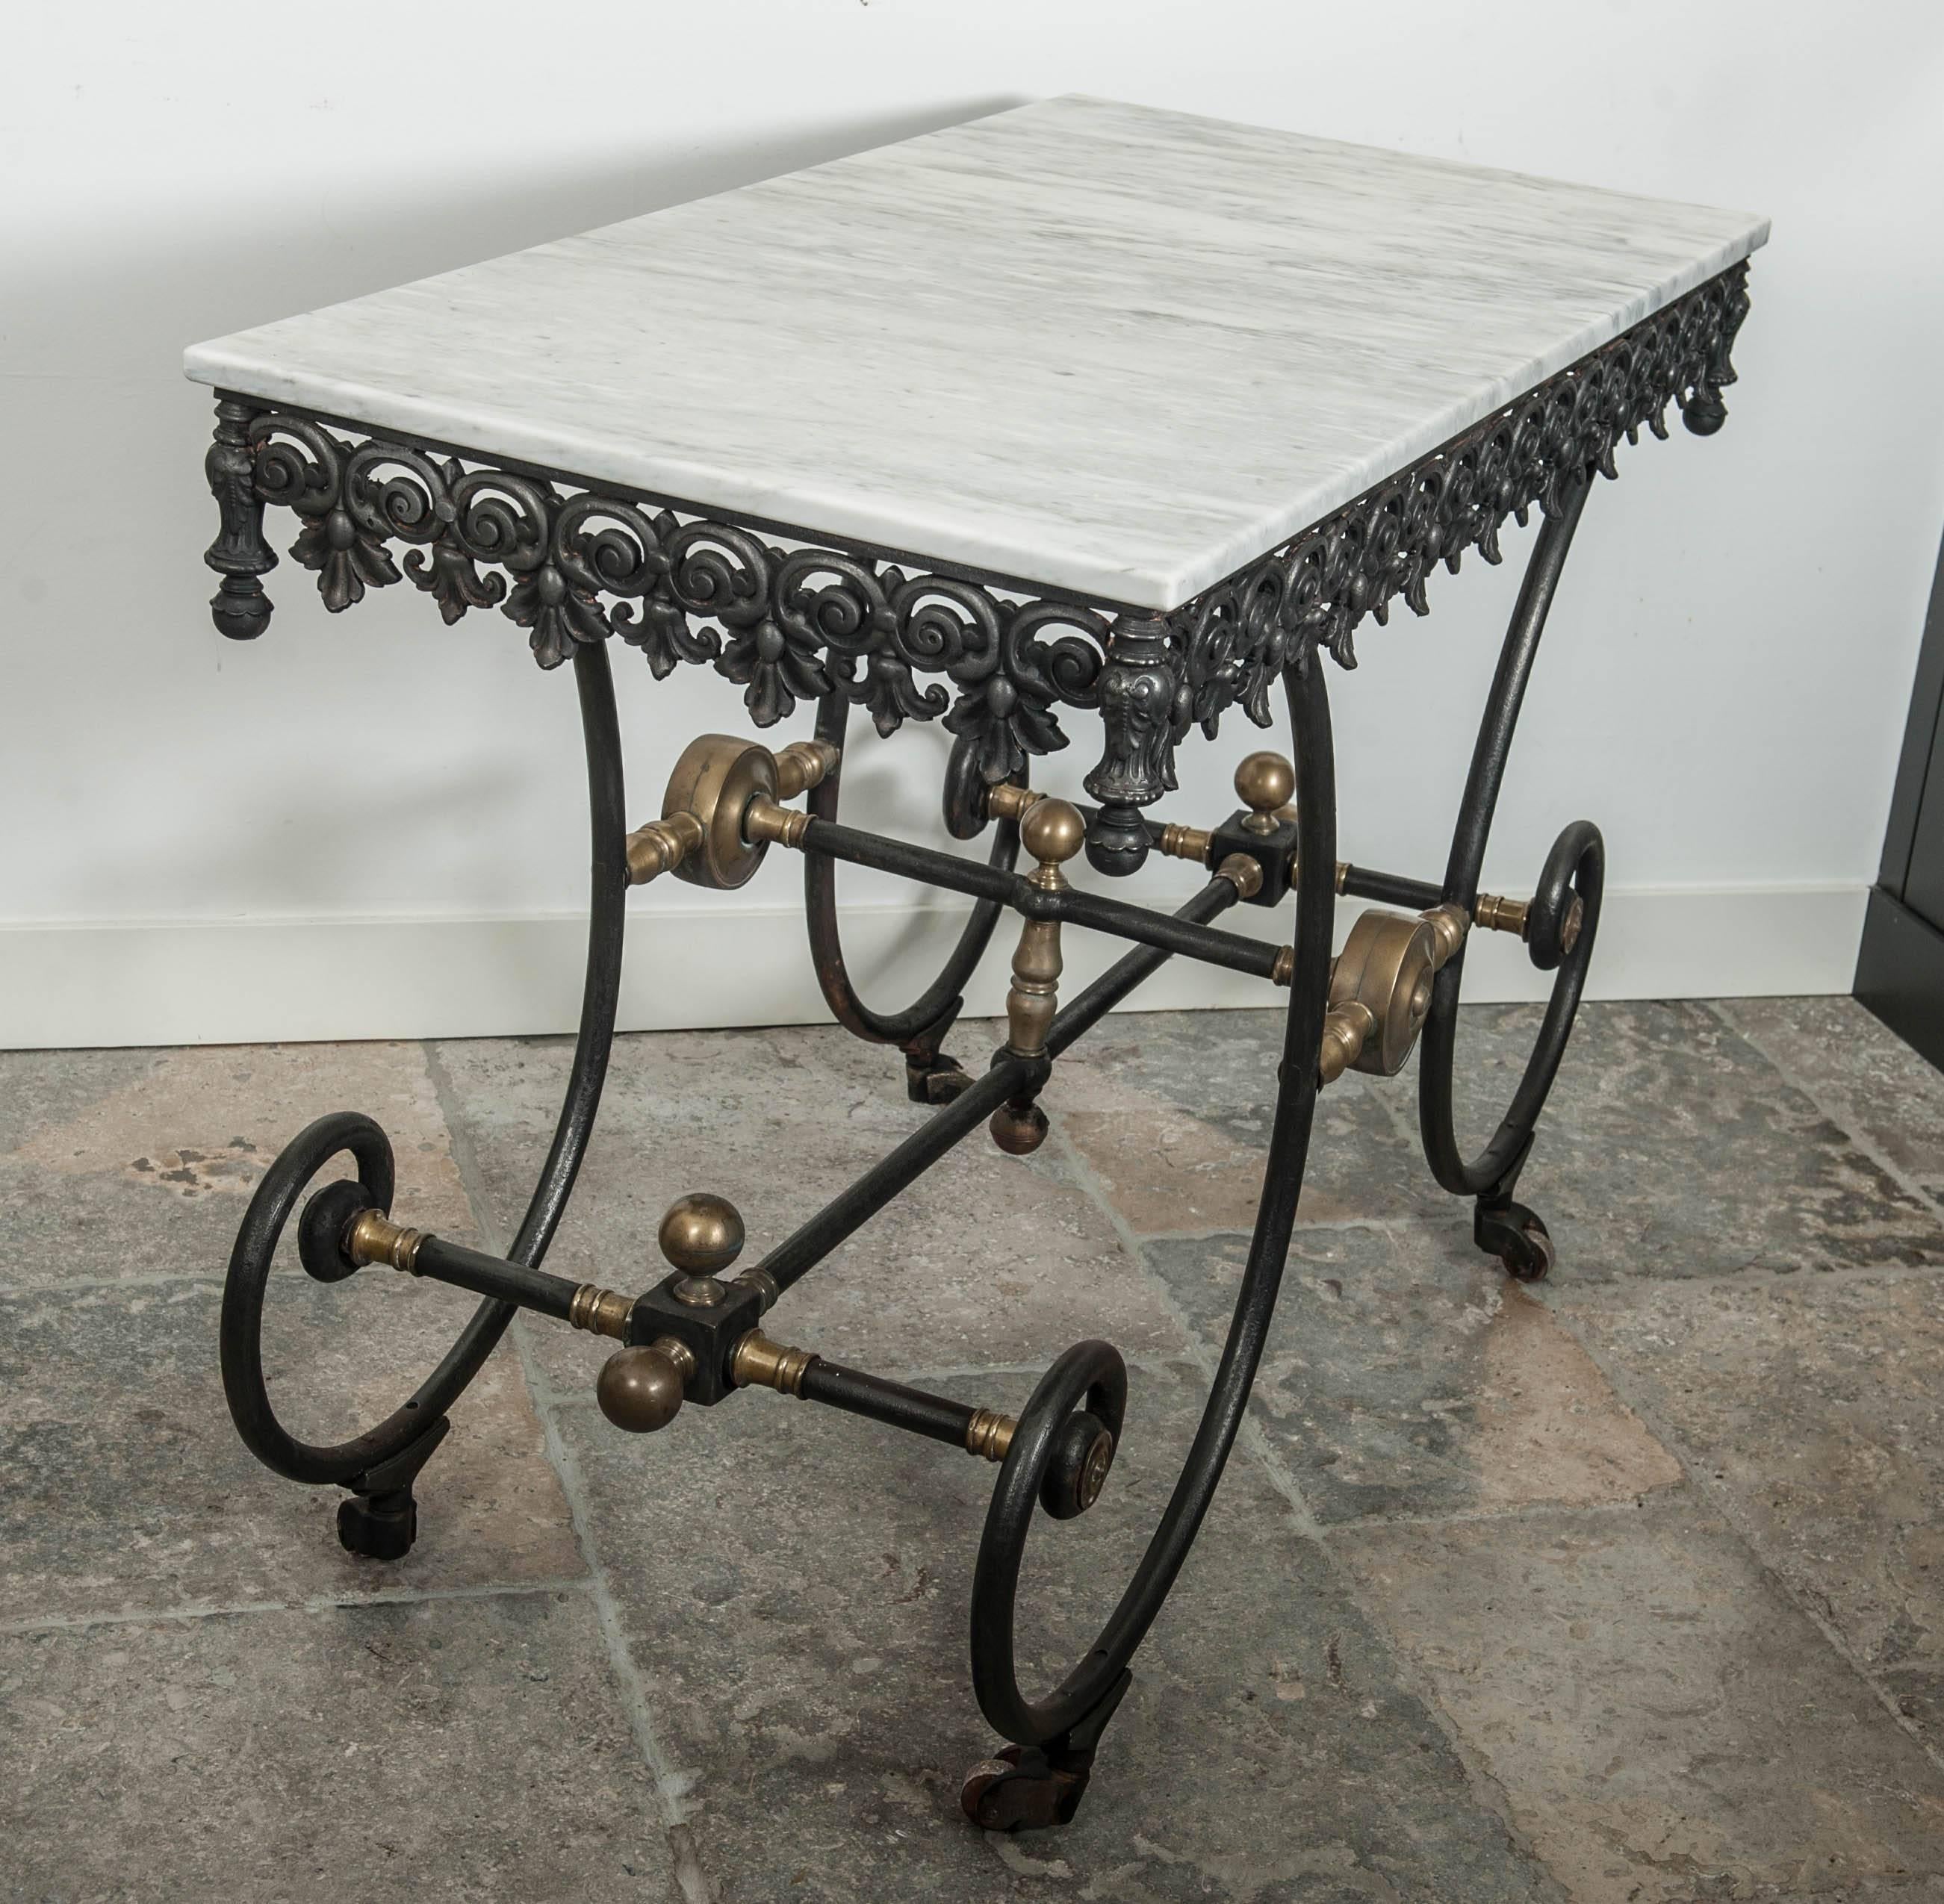 Antique French cast iron, wrought iron and brass butcher table, circa 1900. With Carrara marble top.